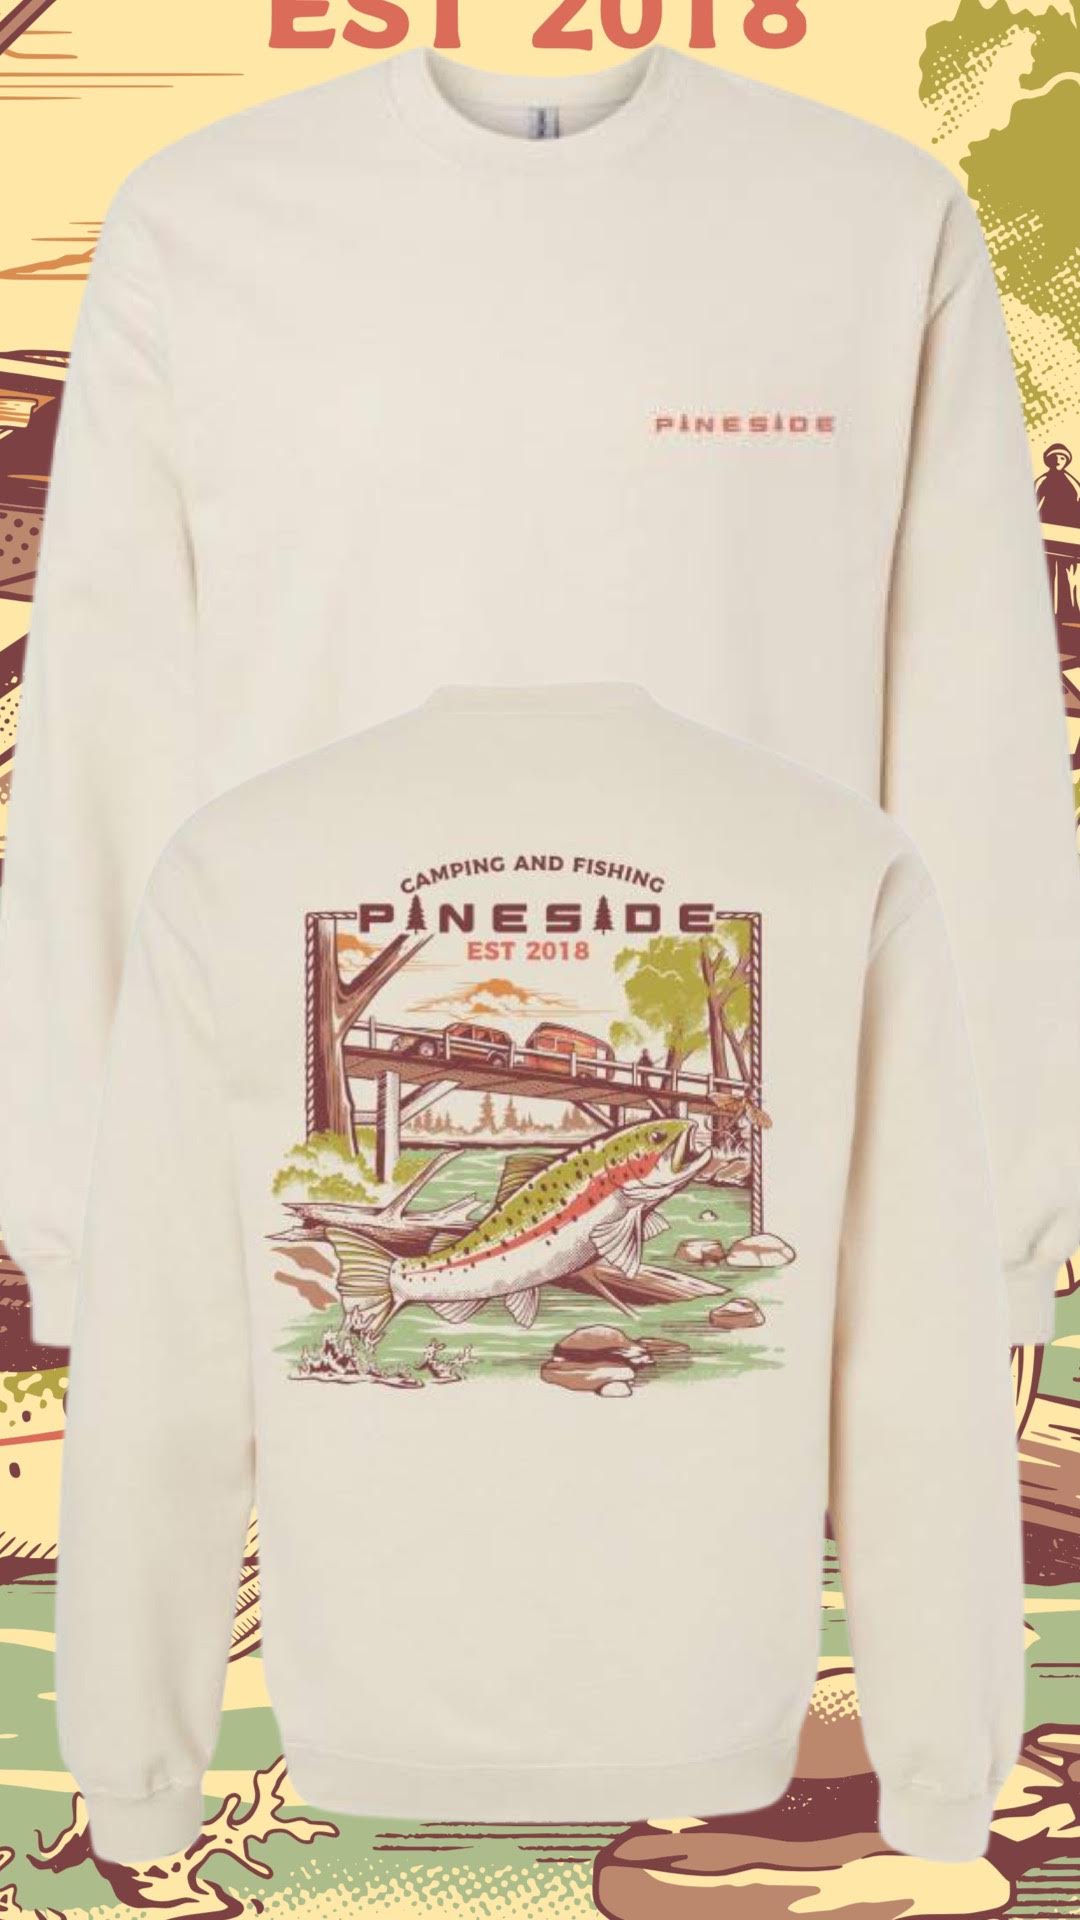 Pineside "Camping and Fishing" Crew Neck